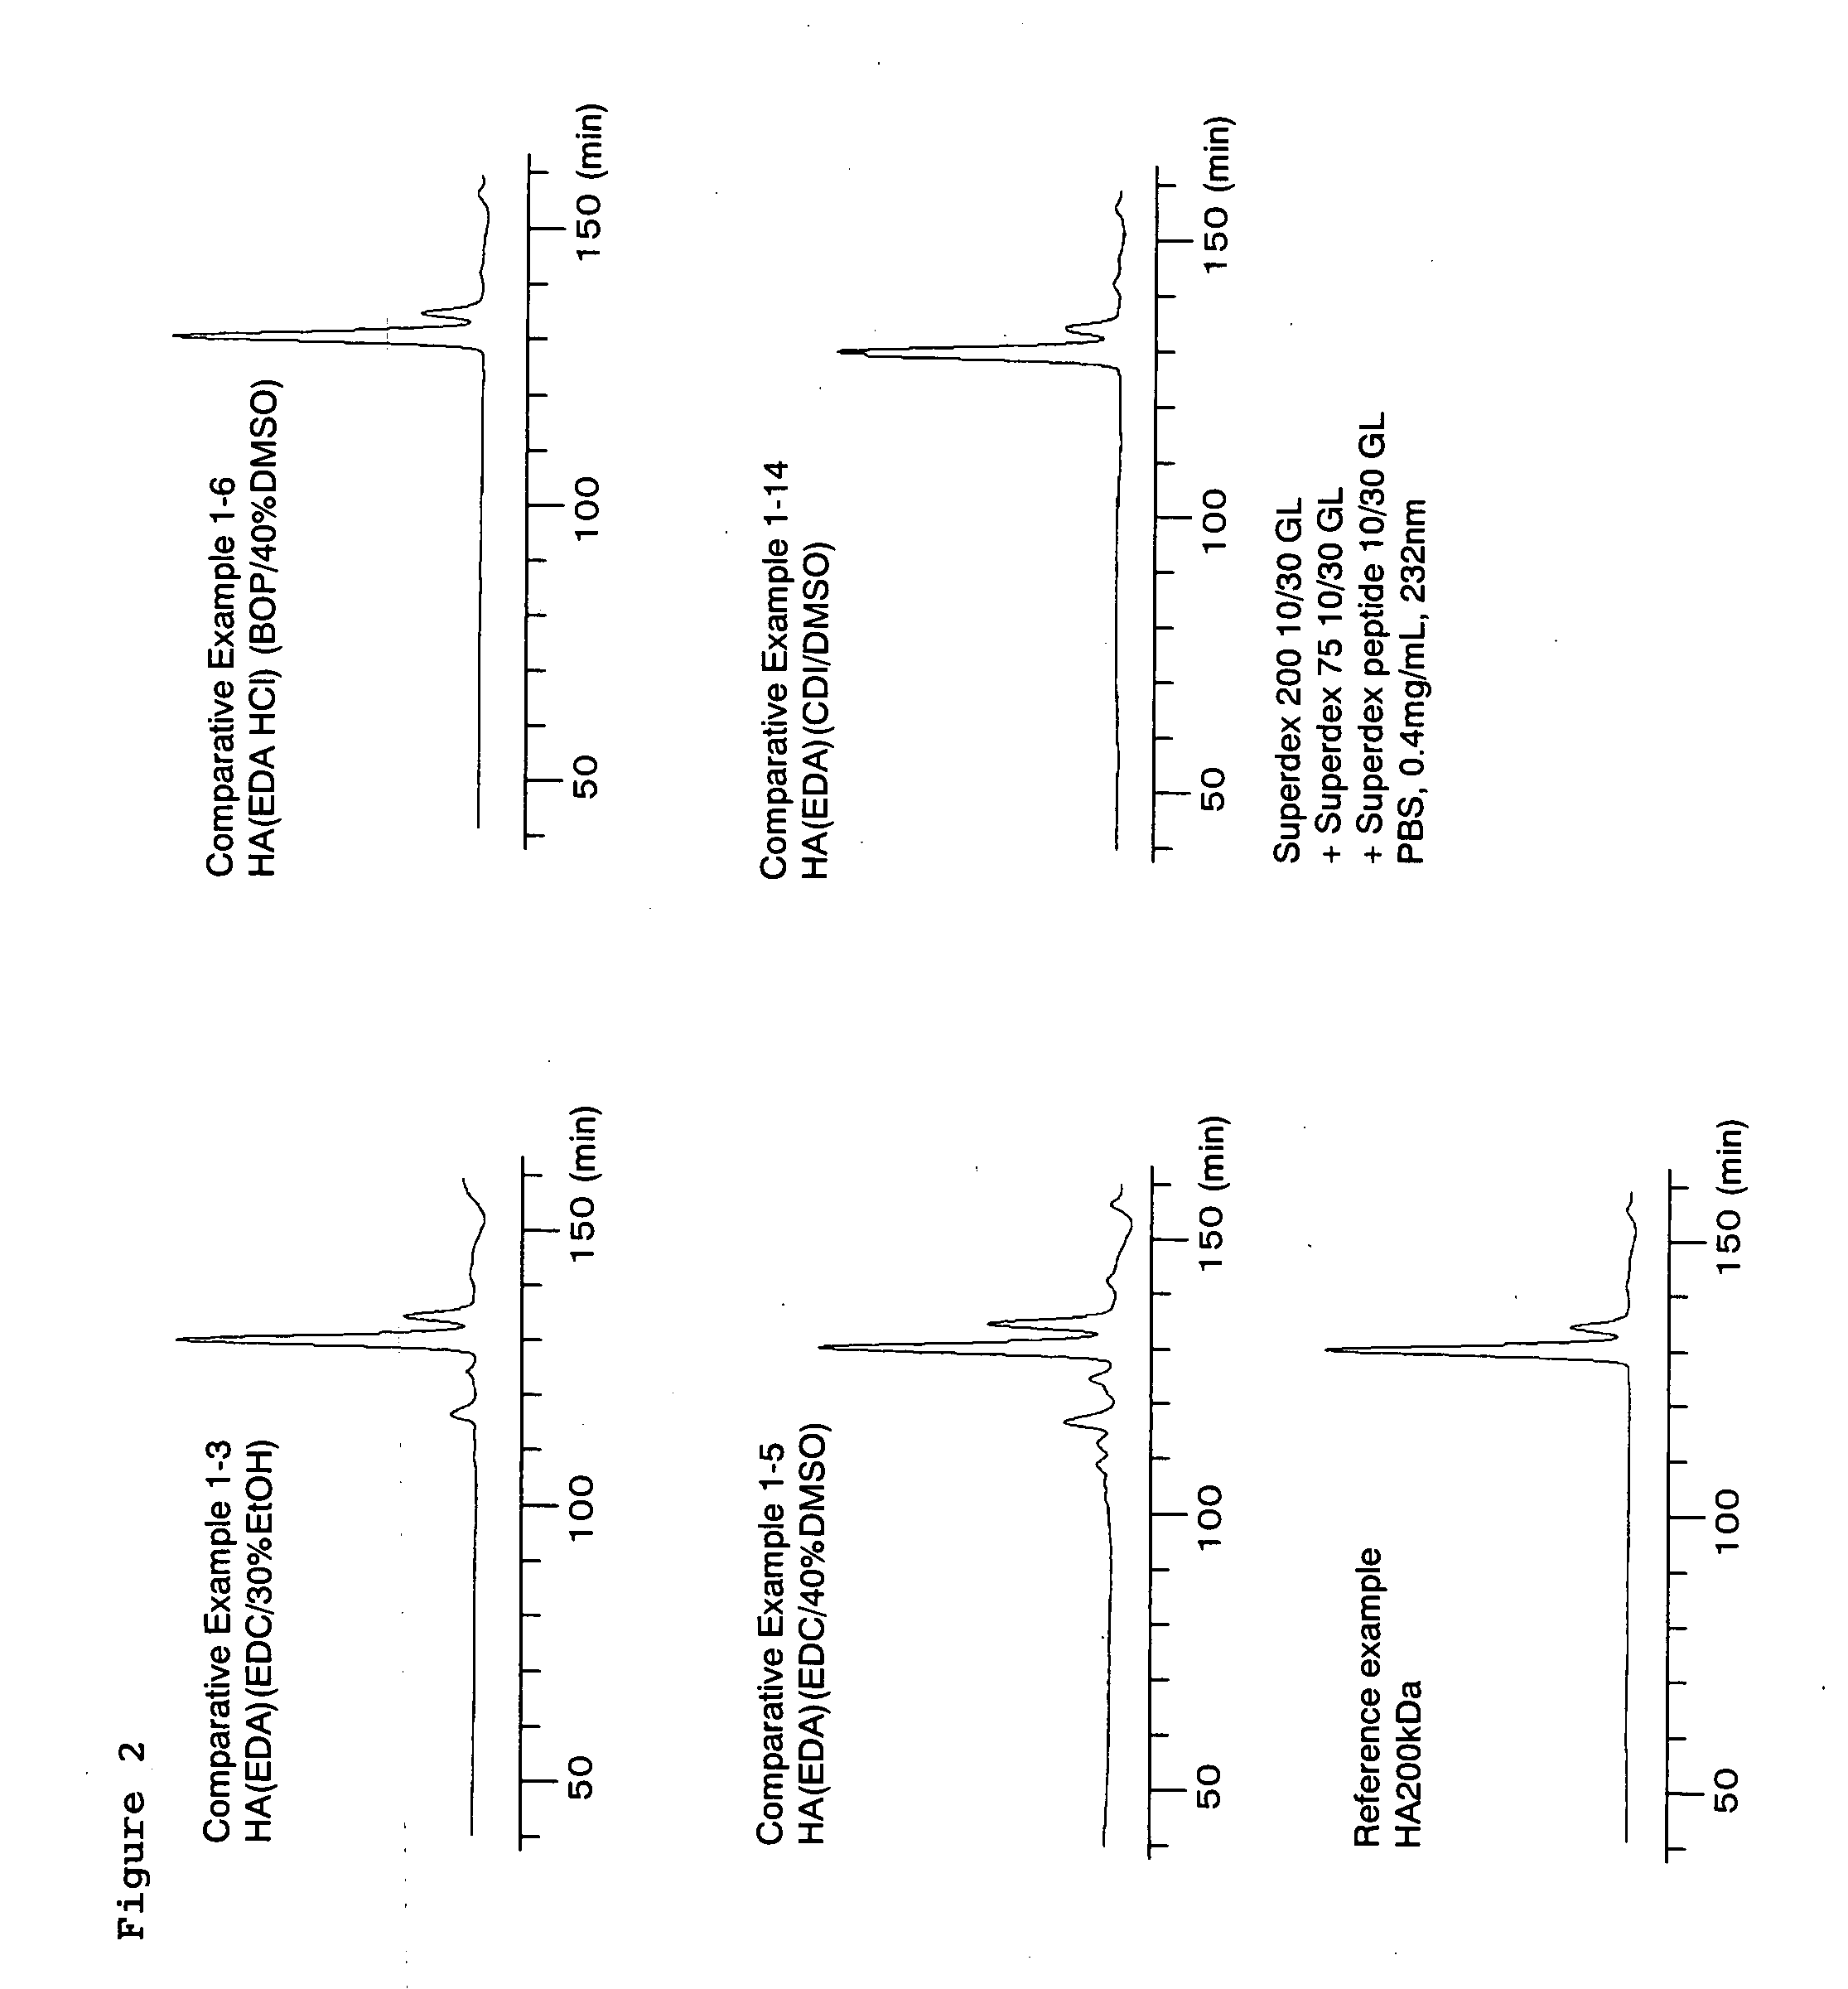 Process for producing water-soluble hyaluronic acid modification